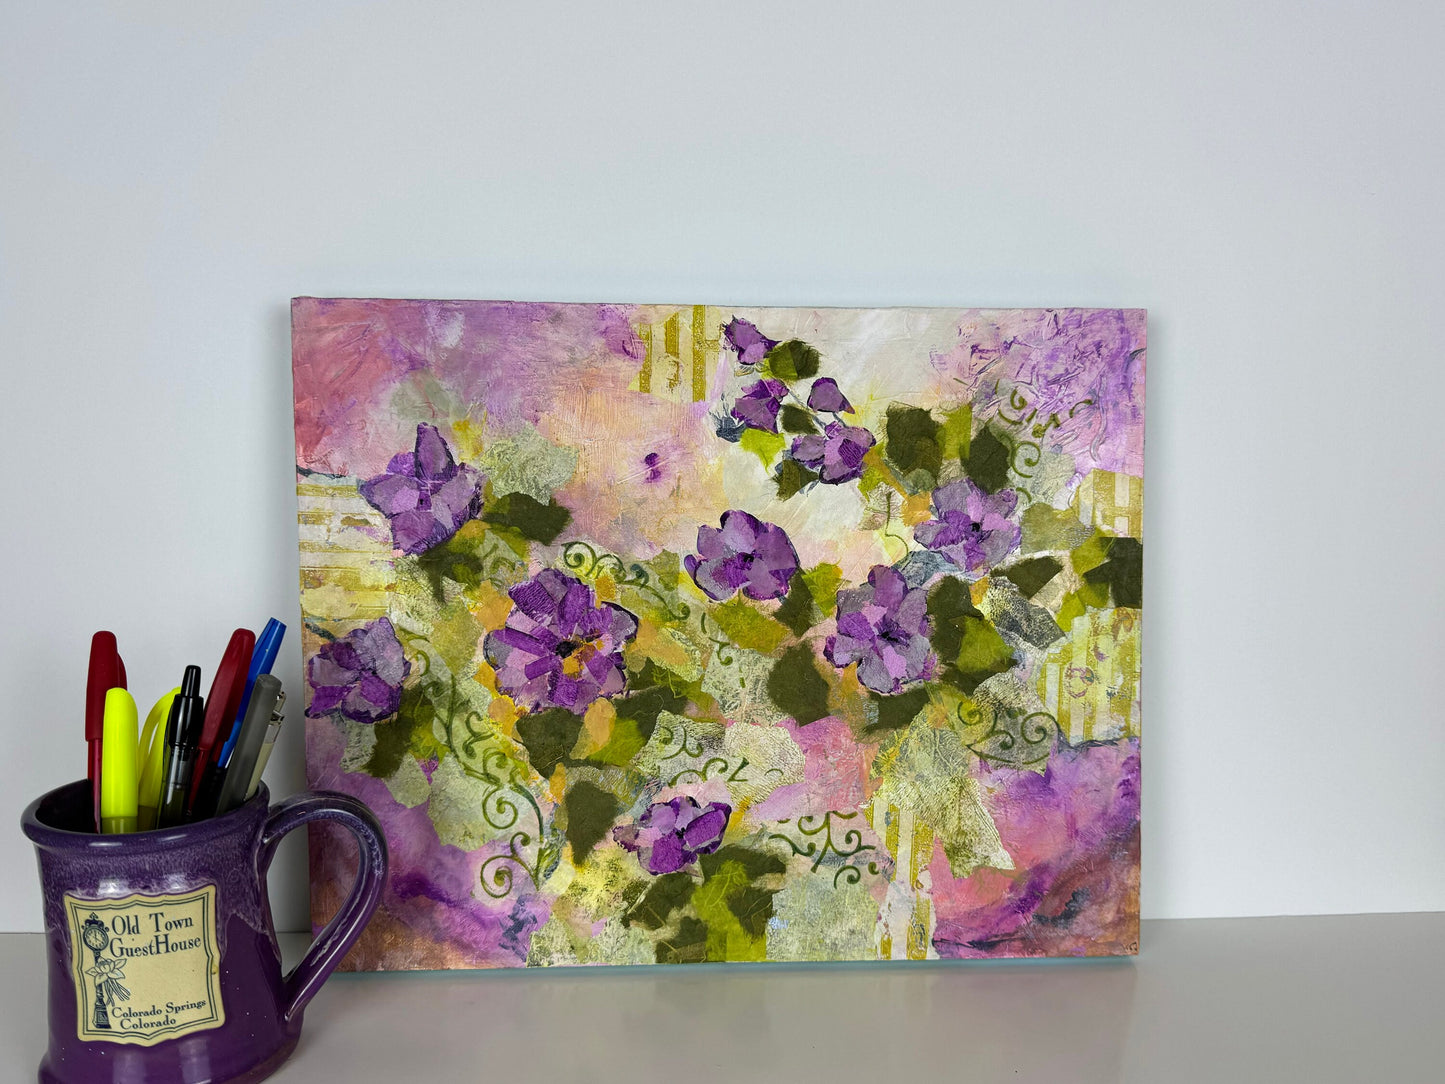 Delicate Memories in Violet Floral Painting Delicate painting Eye catching color Botanical design Nature home accent Feminine decor Collage